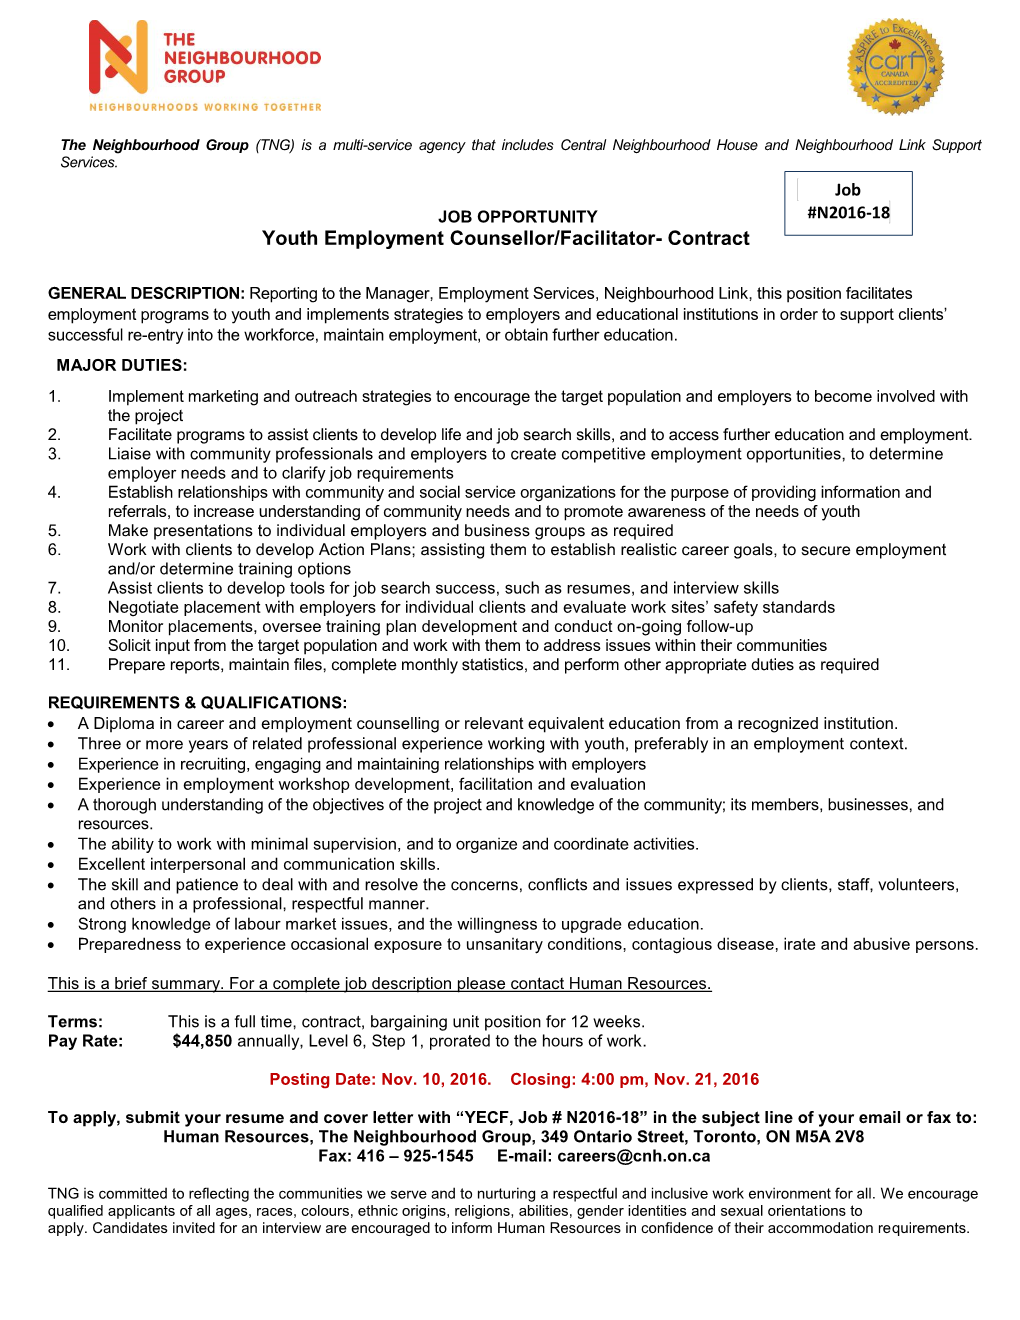 Youth Employment Counsellor/Facilitator- Contract